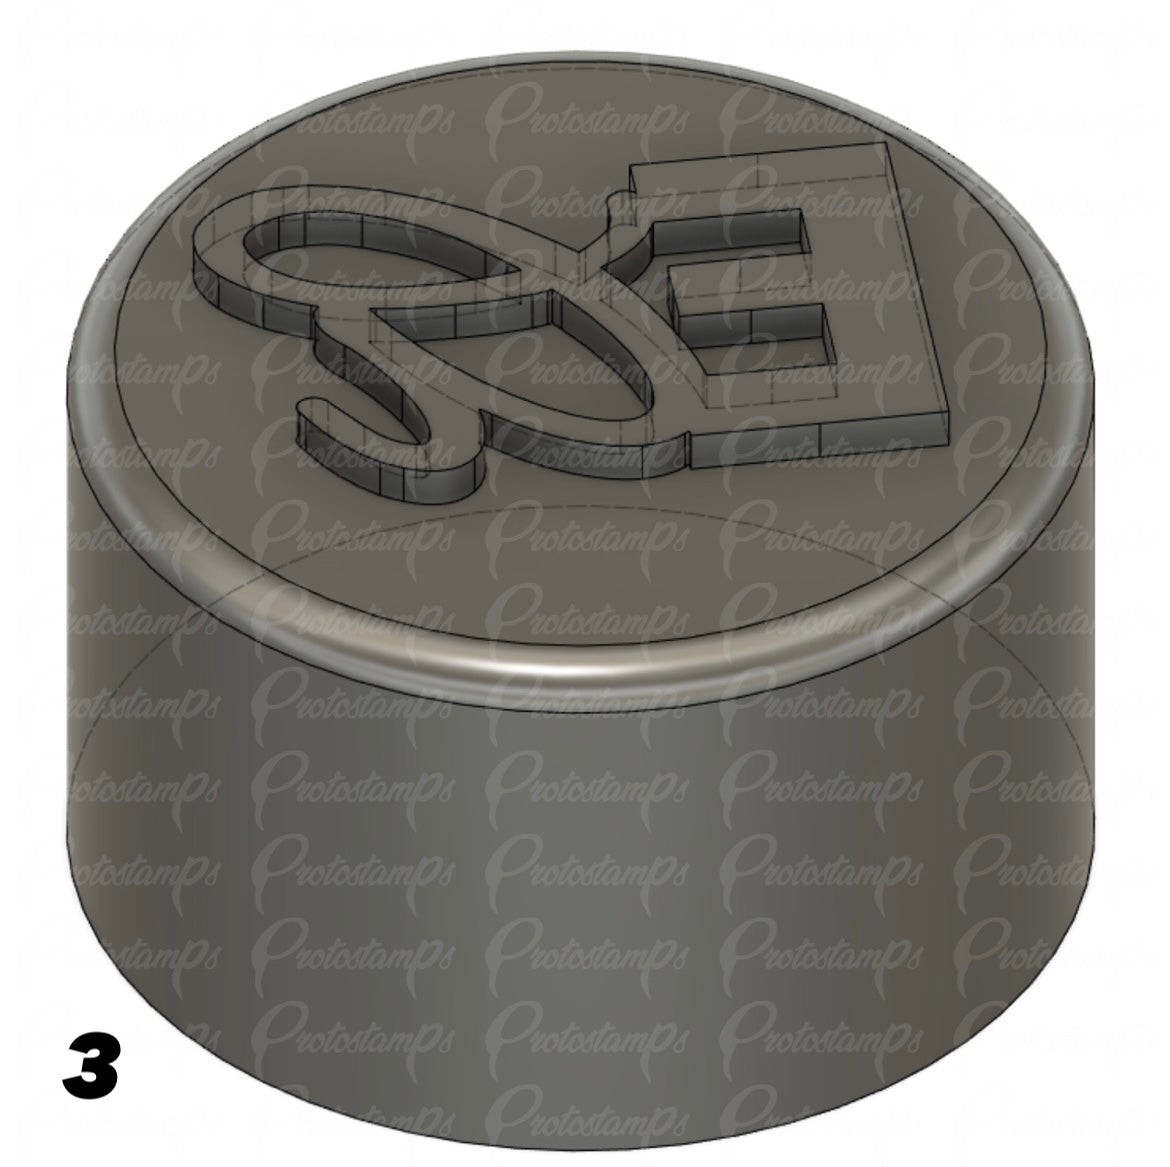 Custom 30mm Stamp, Price Includes Shipping